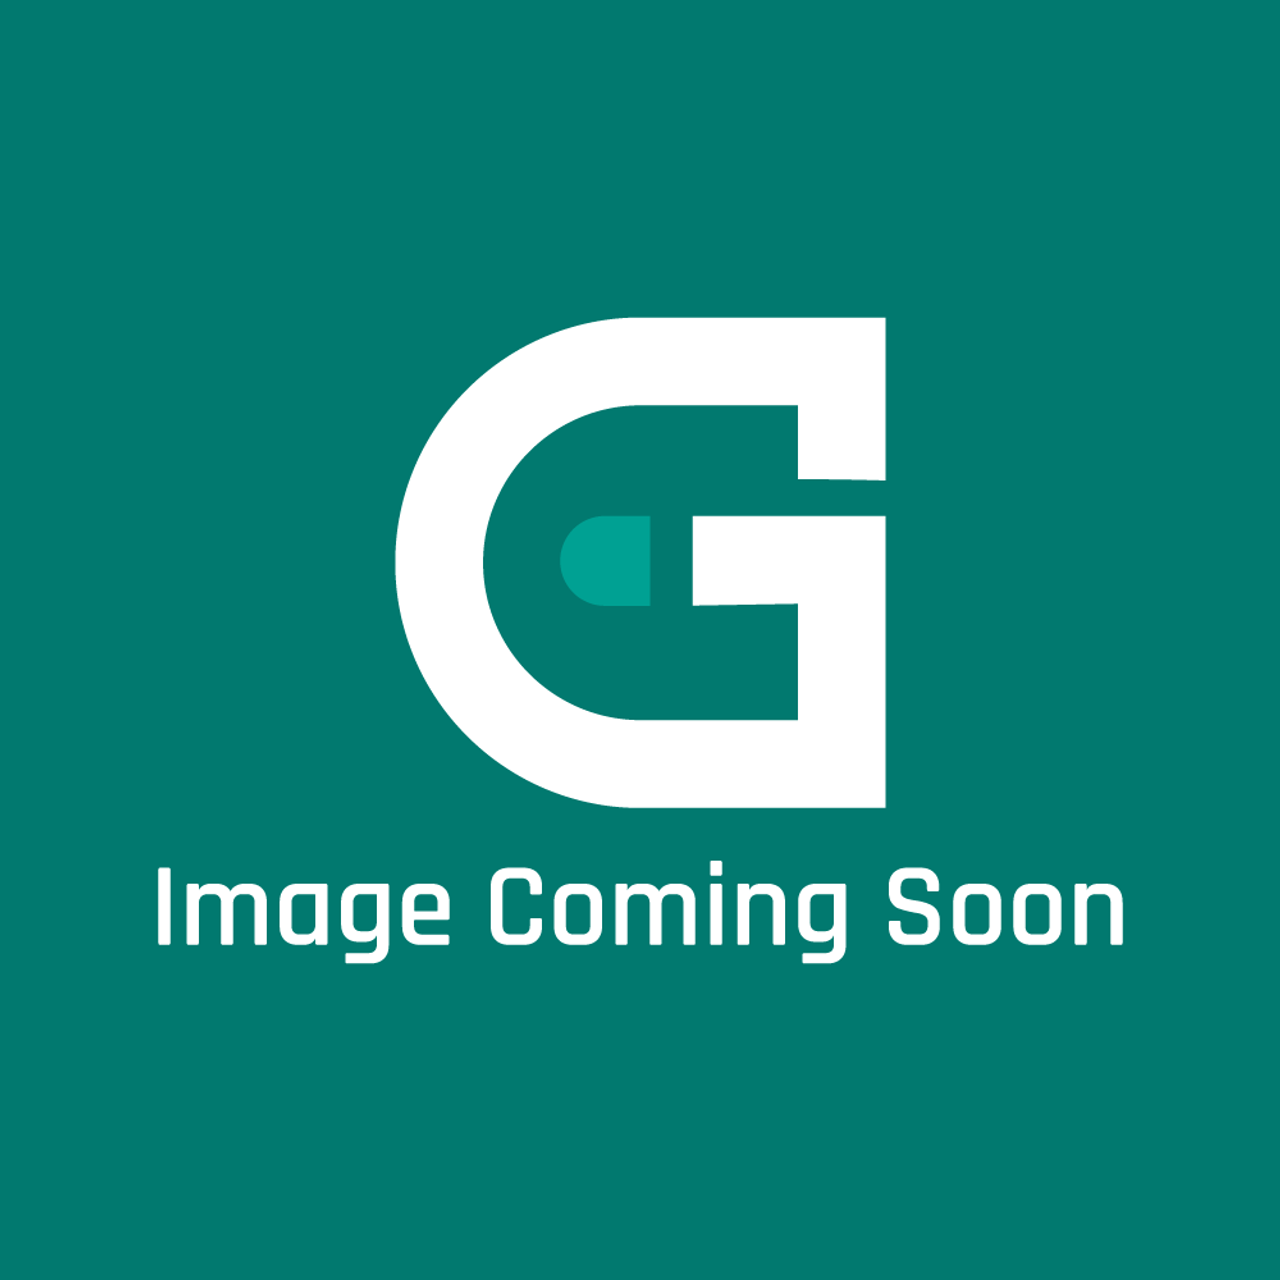 Frigidaire - Electrolux 316577040 Controller - Image Coming Soon!